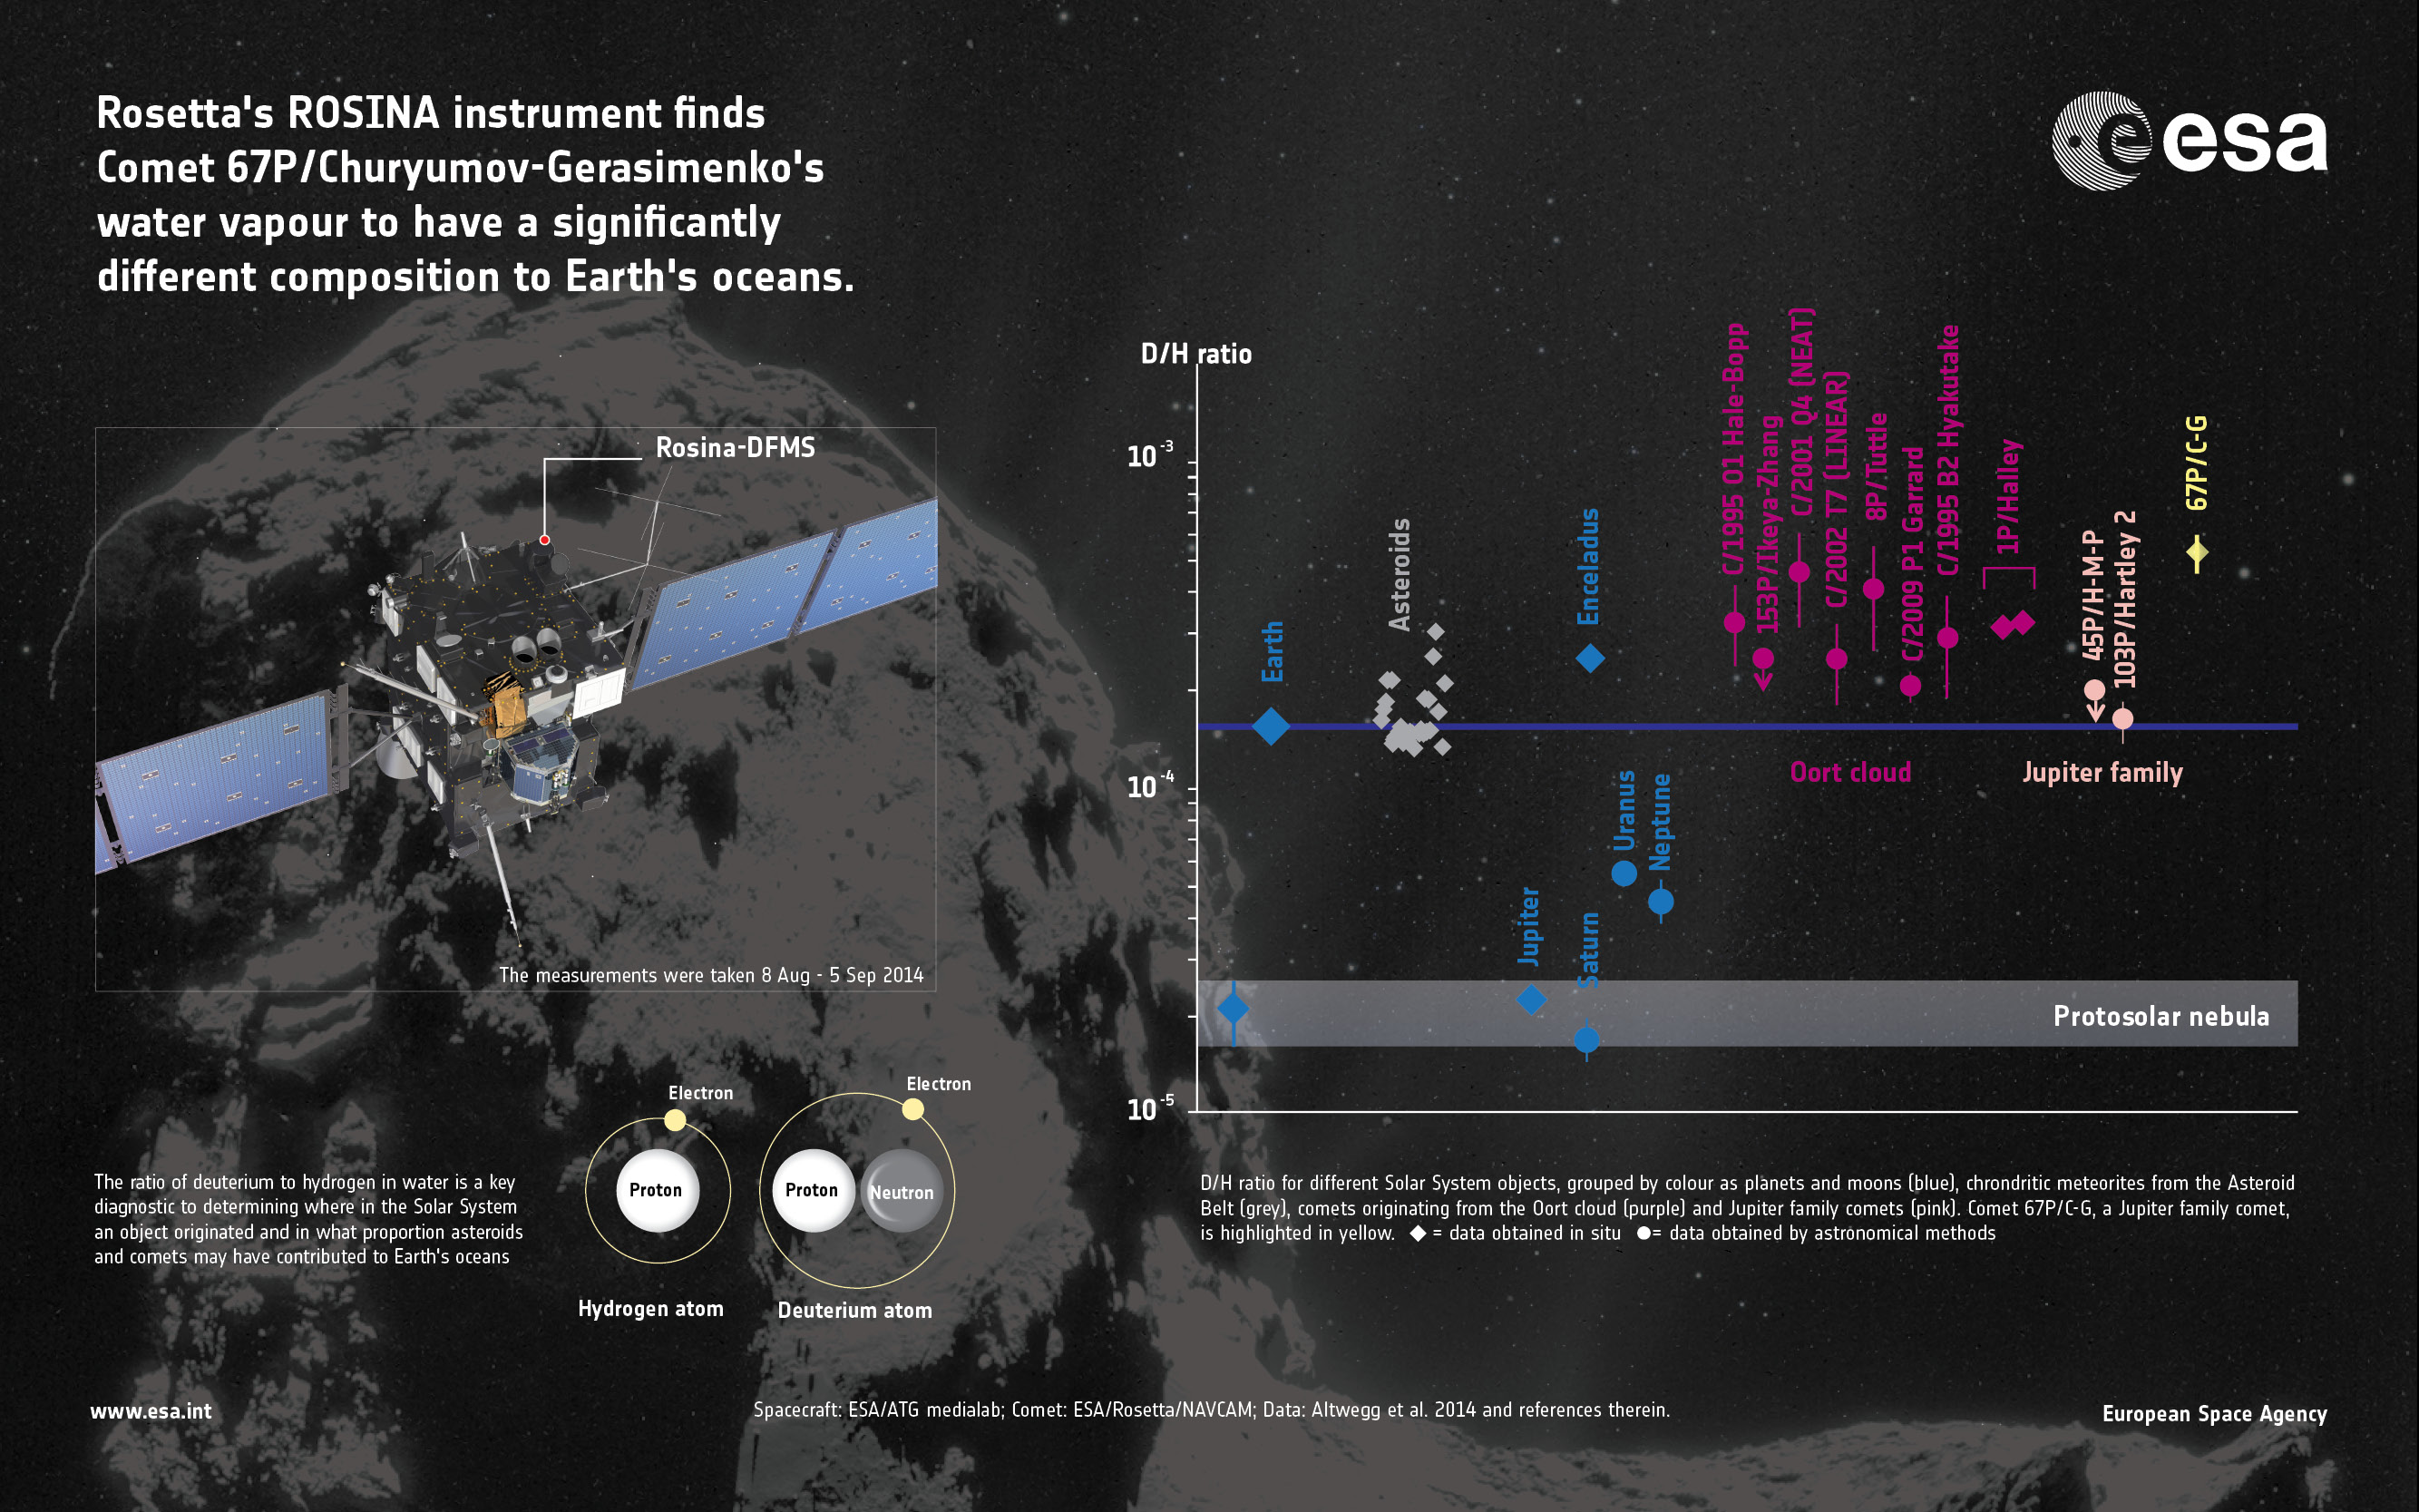 First measurements of comet’s water ratio.  Rosetta’s measurement of the deuterium-to-hydrogen ratio (D/H) measured in the water vapour around Comet 67P/Churyumov–Gerasimenko. The measurements were made using ROSINA’s DFMS double focusing mass spectrometer between 8 August and 5 September 2014.  The graph displays the different values of D/H in water observed in various bodies in the Solar System. Credit: ESA/ATG medialab/Rosetta/NavCam; Data: Altwegg et al. 2014